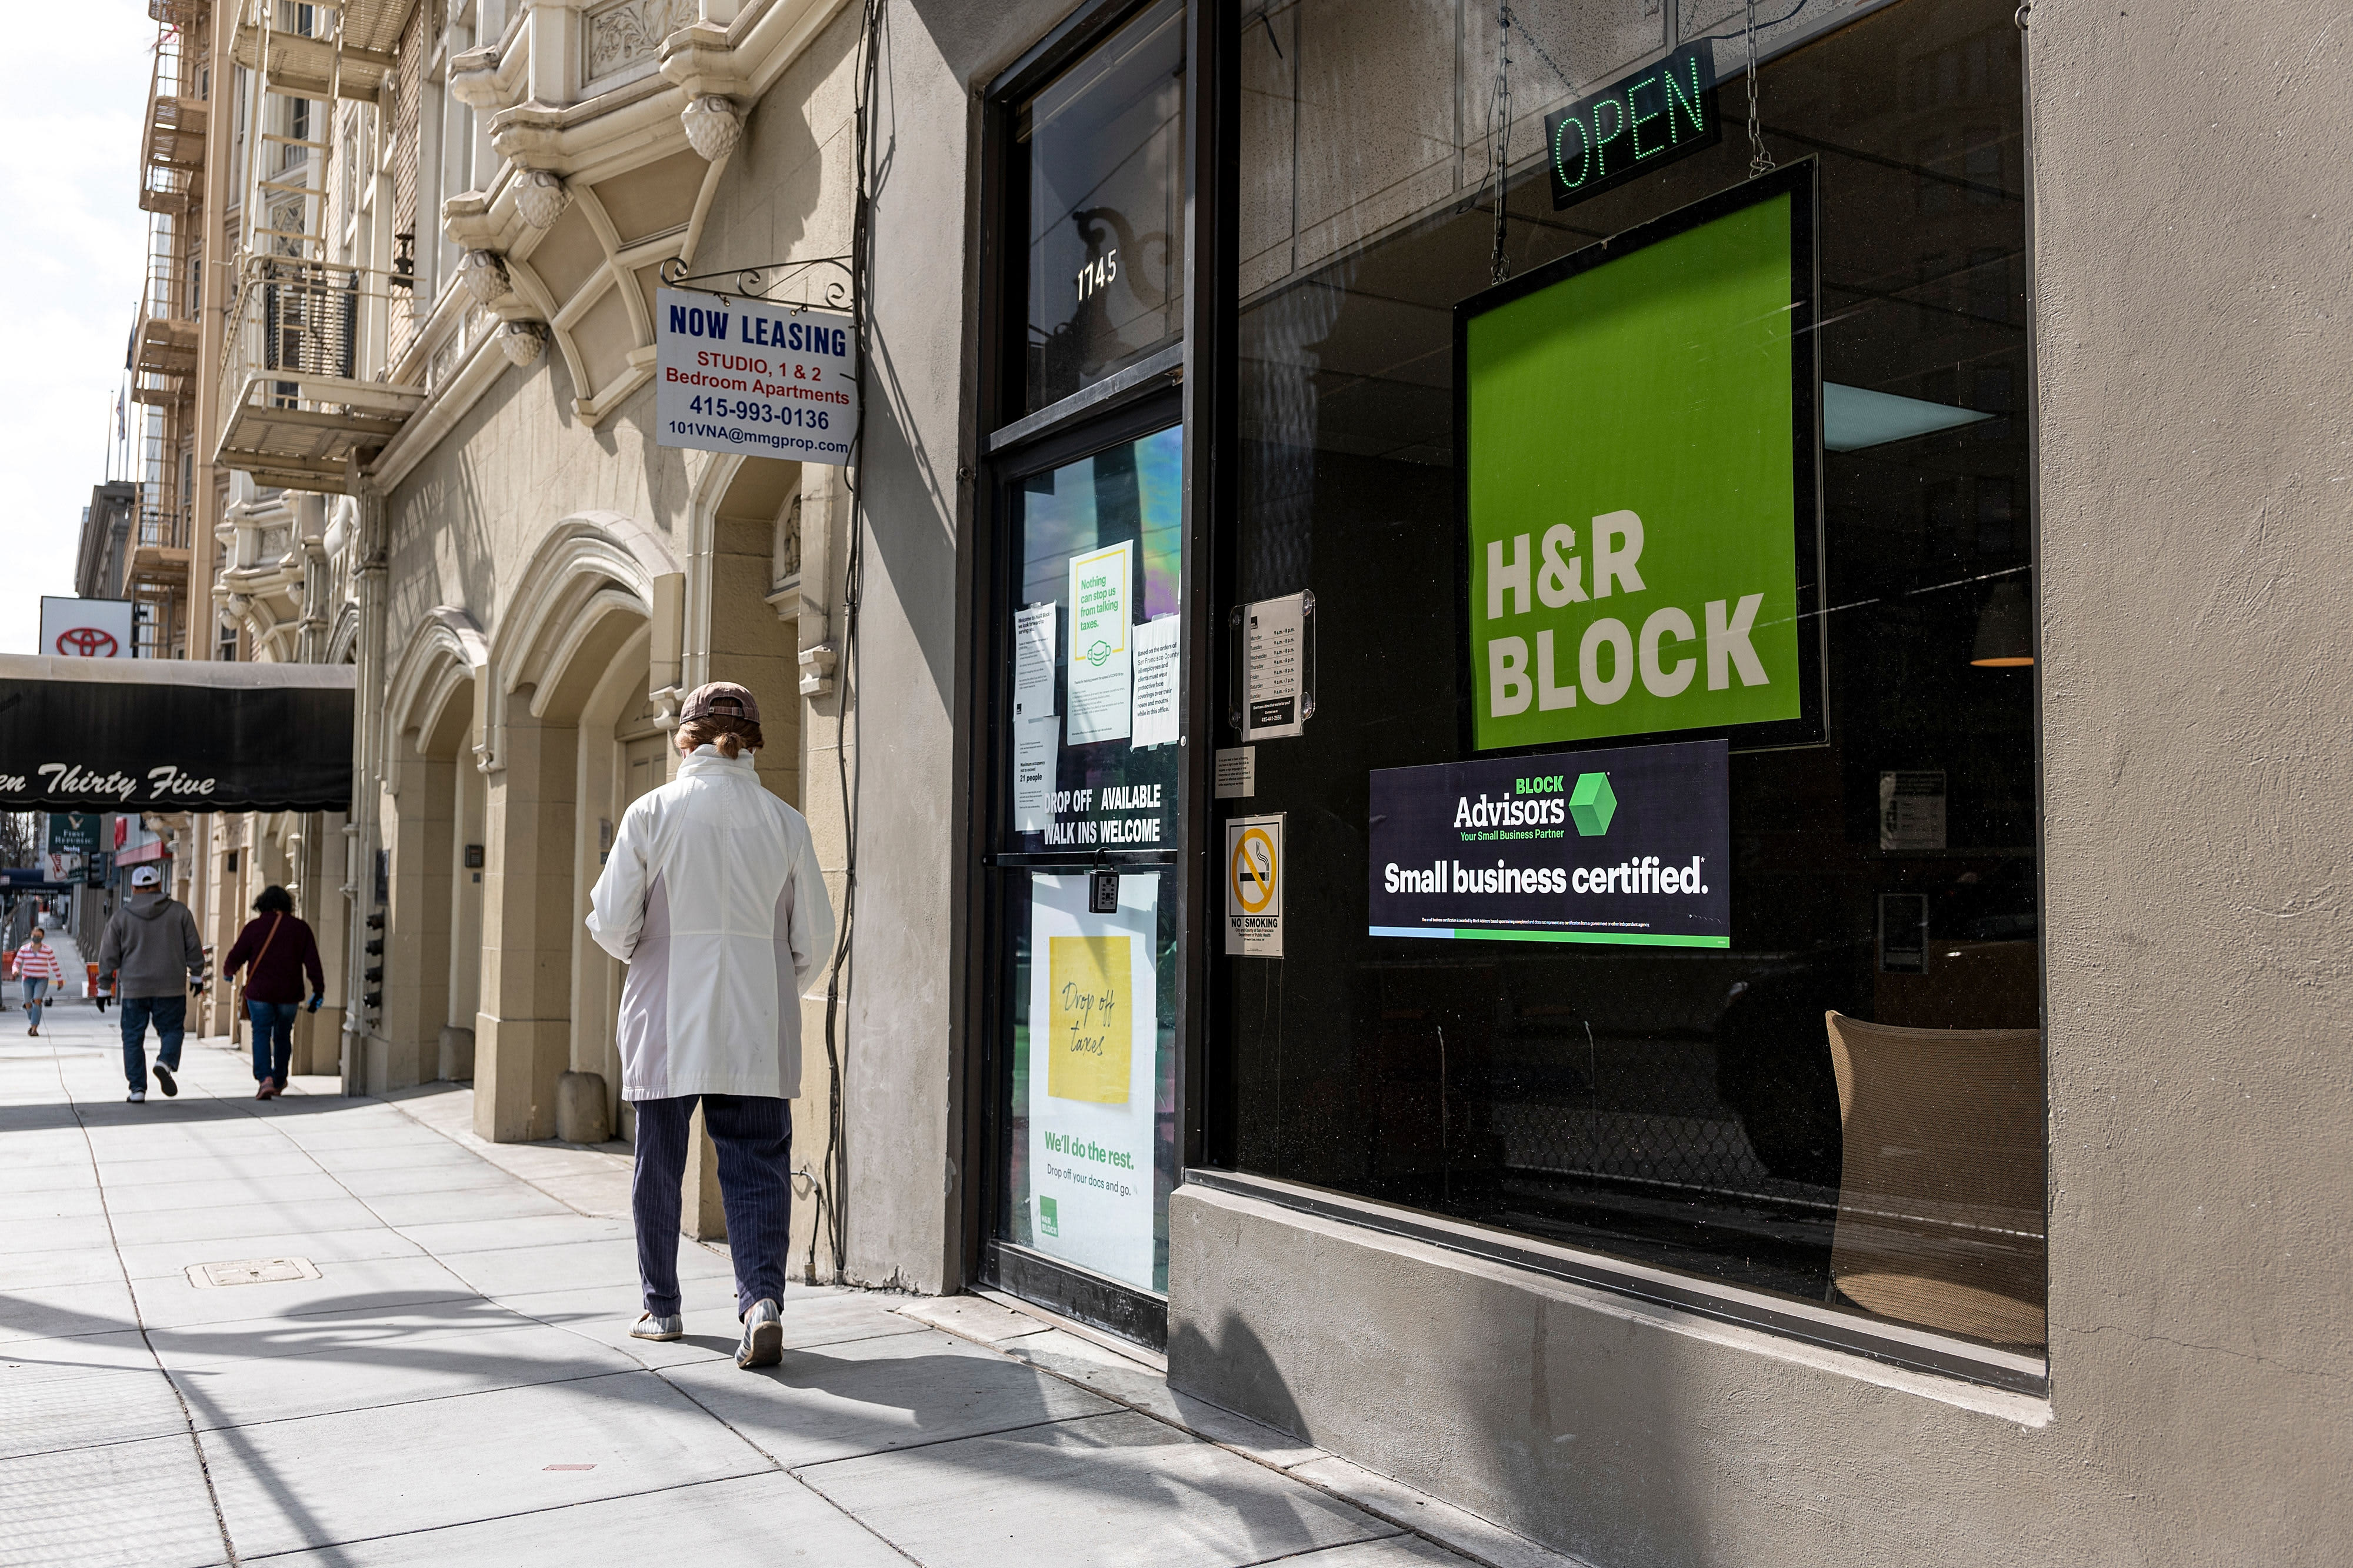 H&R Block sues over Square's new name 'Block'